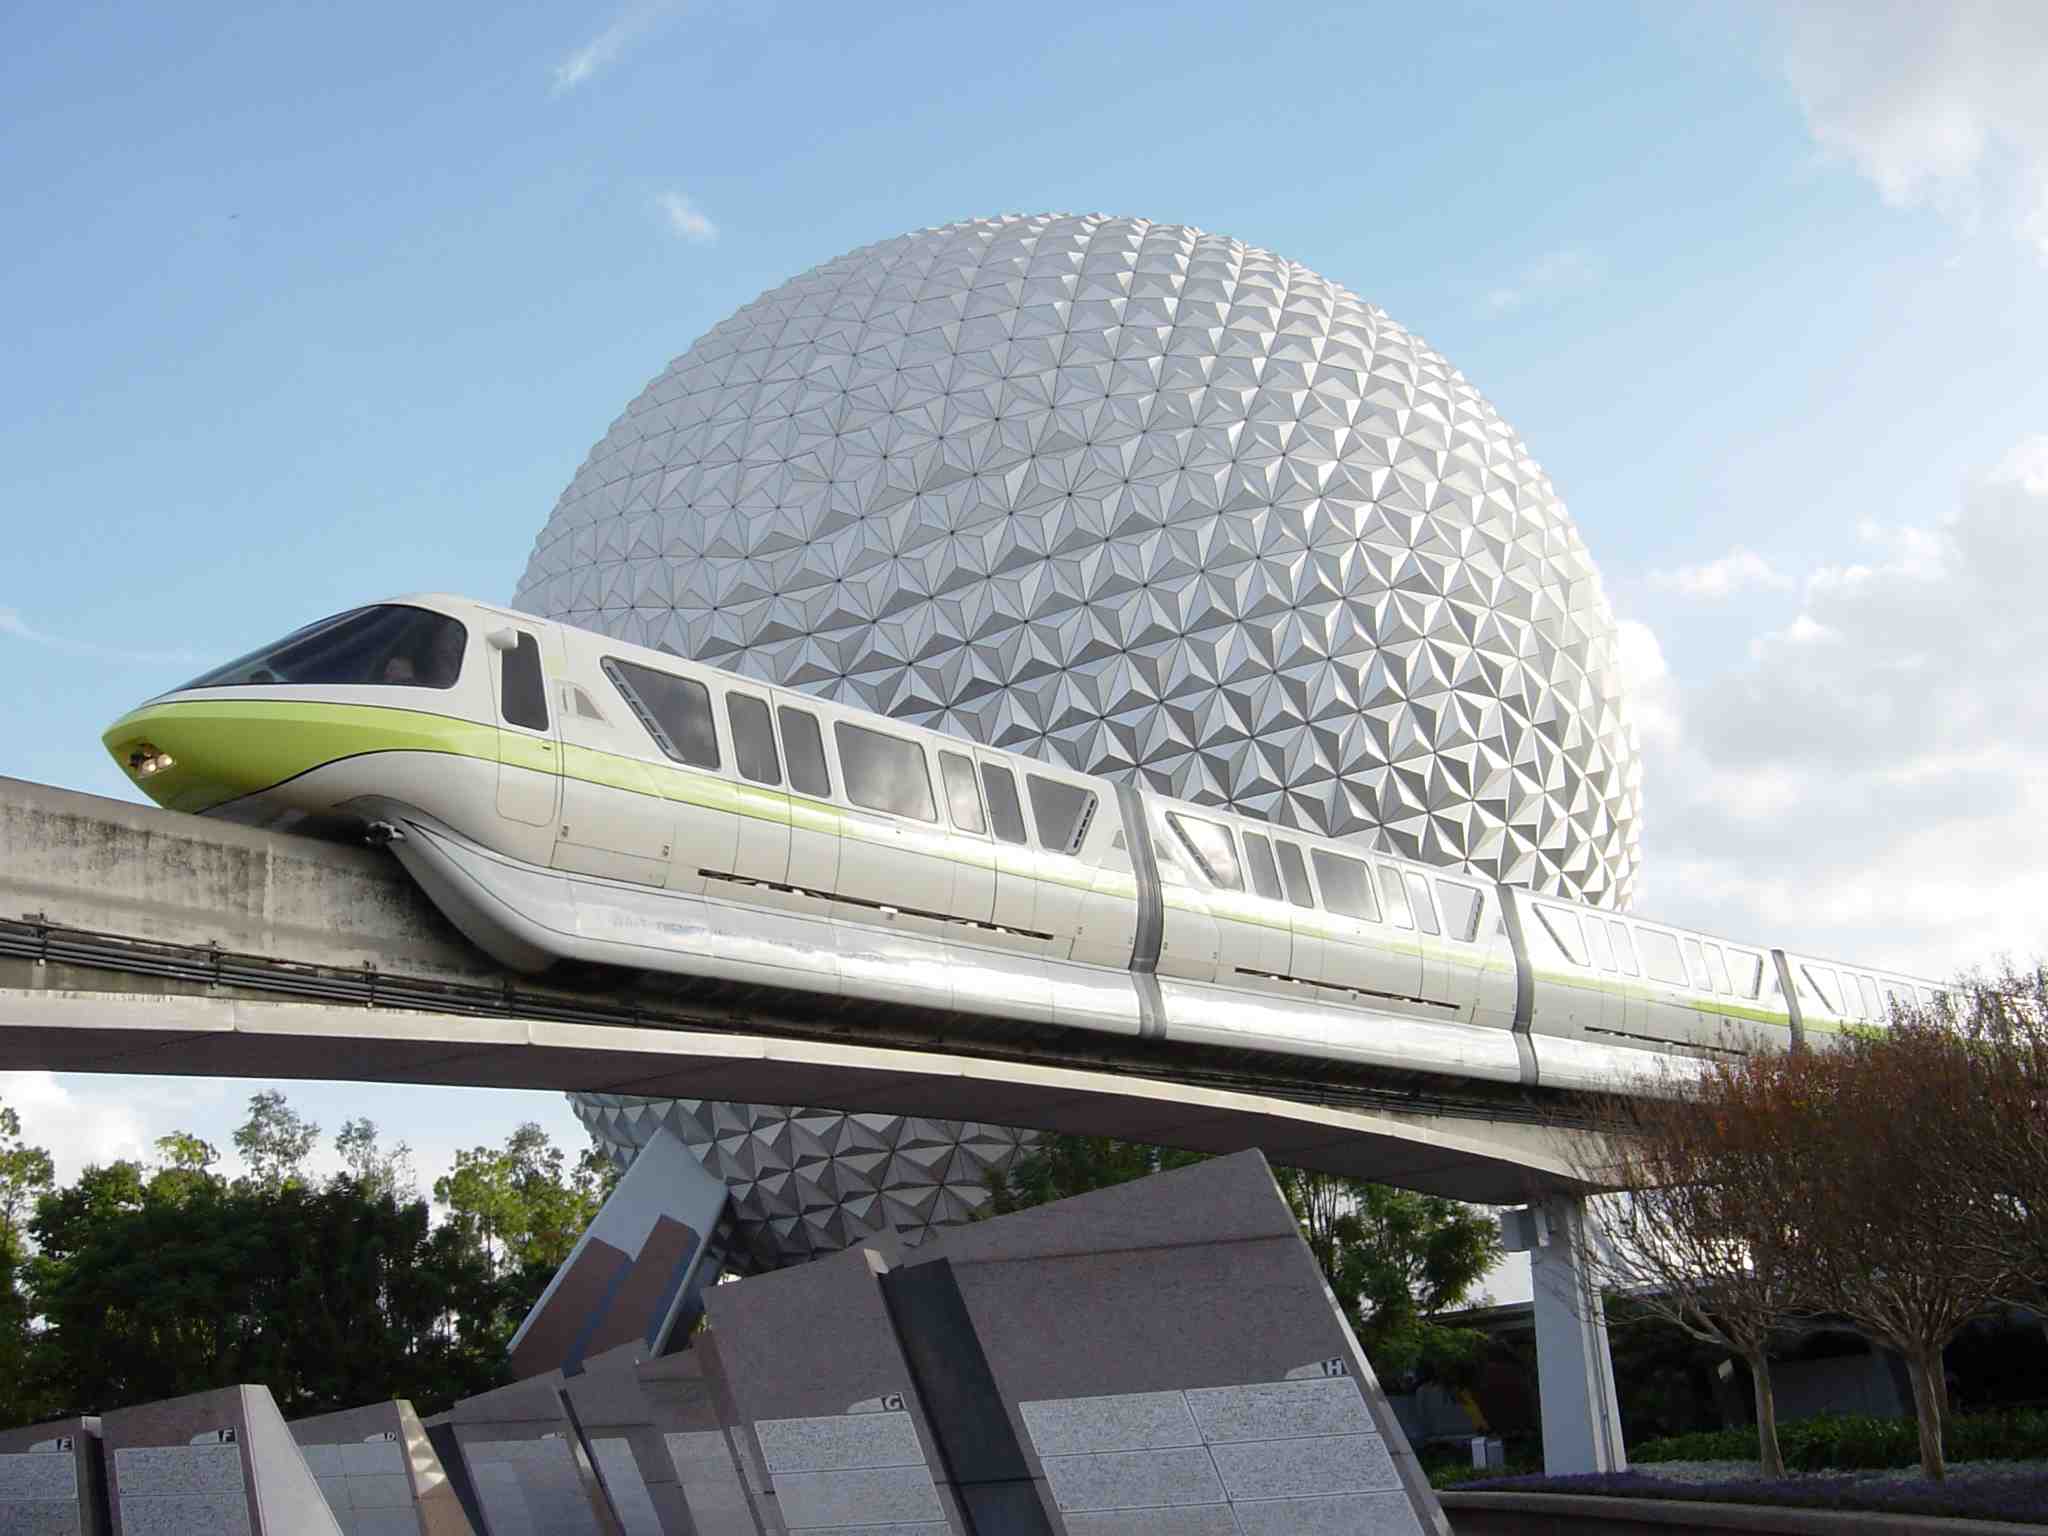 Images Wikimedia Commons/4 Lime Bye Monorail_Lime_and_Spaceship_Earth_(3775235515).jpg